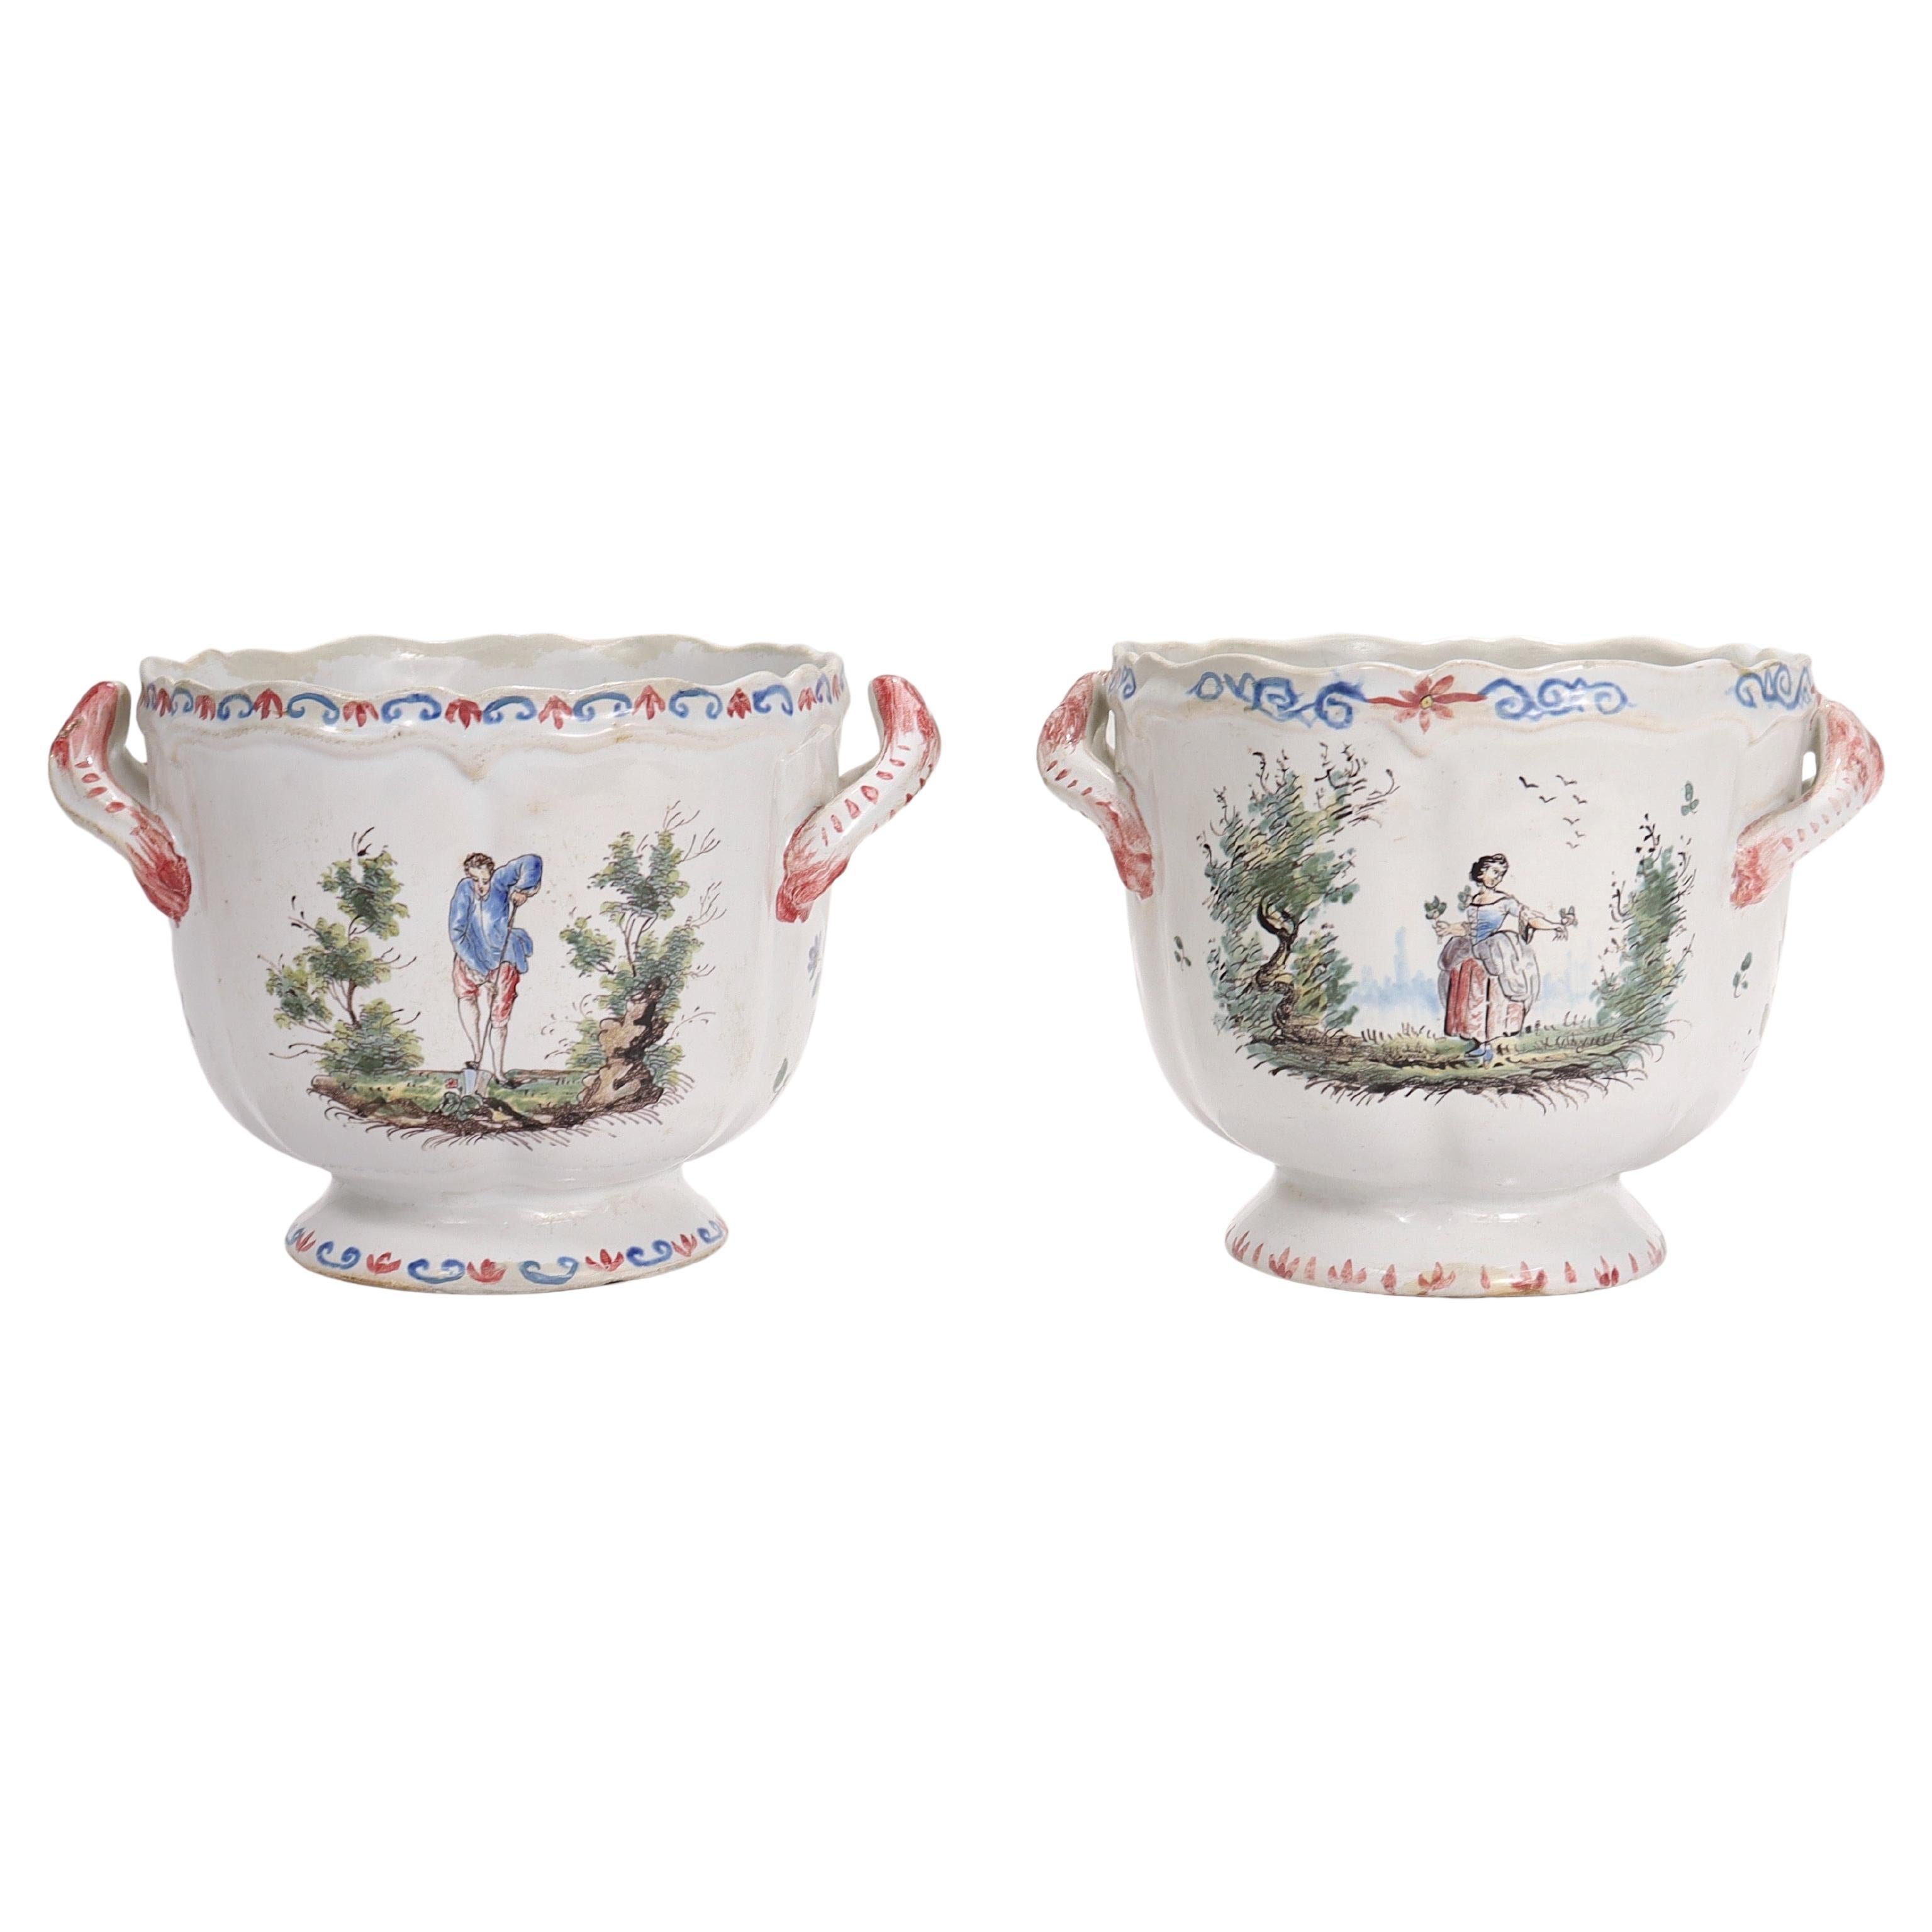 Pair of Antique Aprey French Faience Pottery Cachepots or Jardinieres For Sale